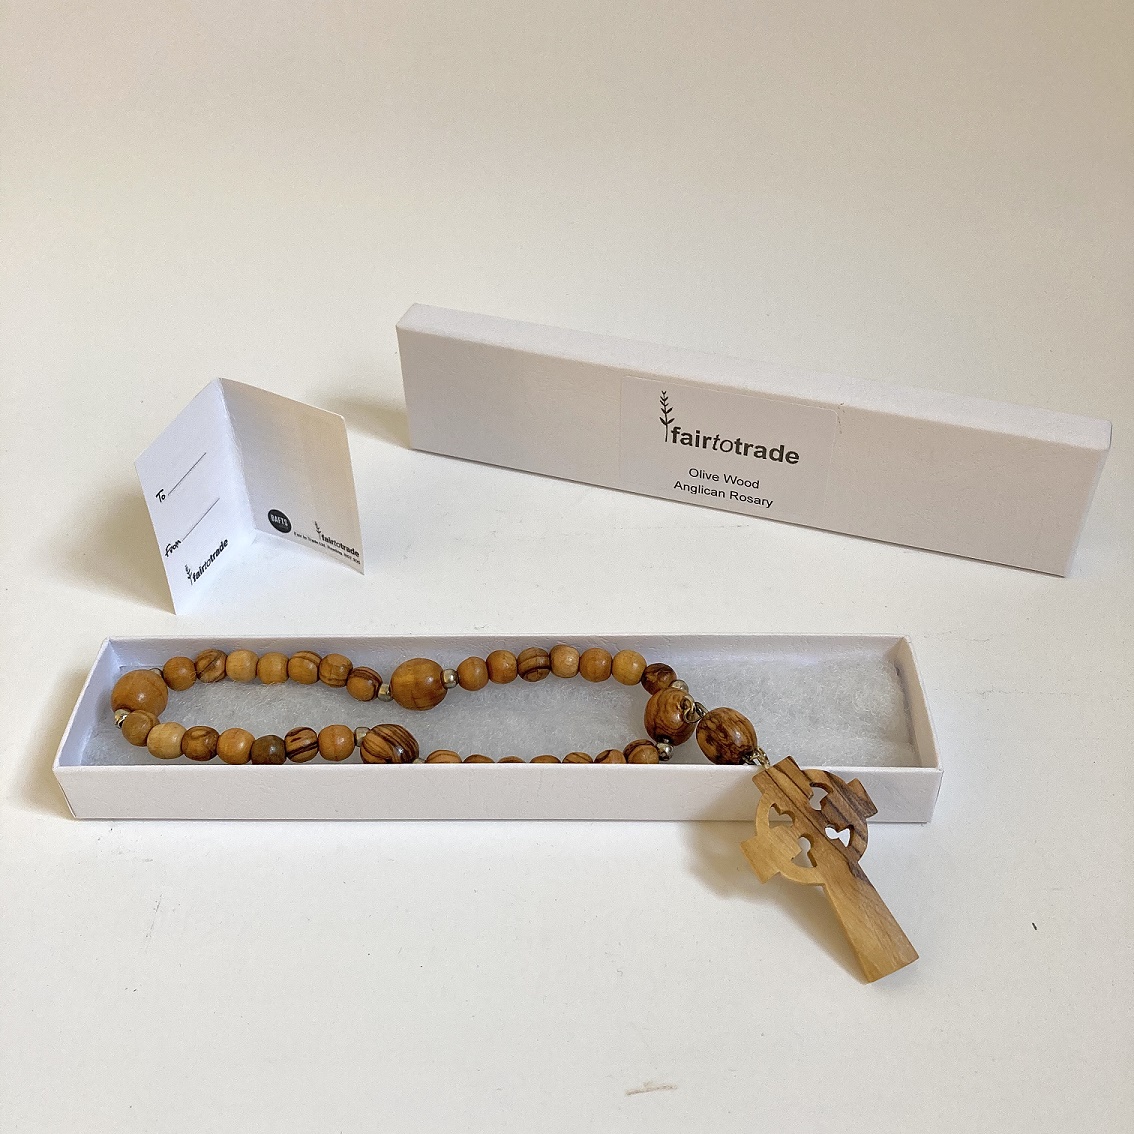 Fair Trade Olive Wood Anglican Rosary